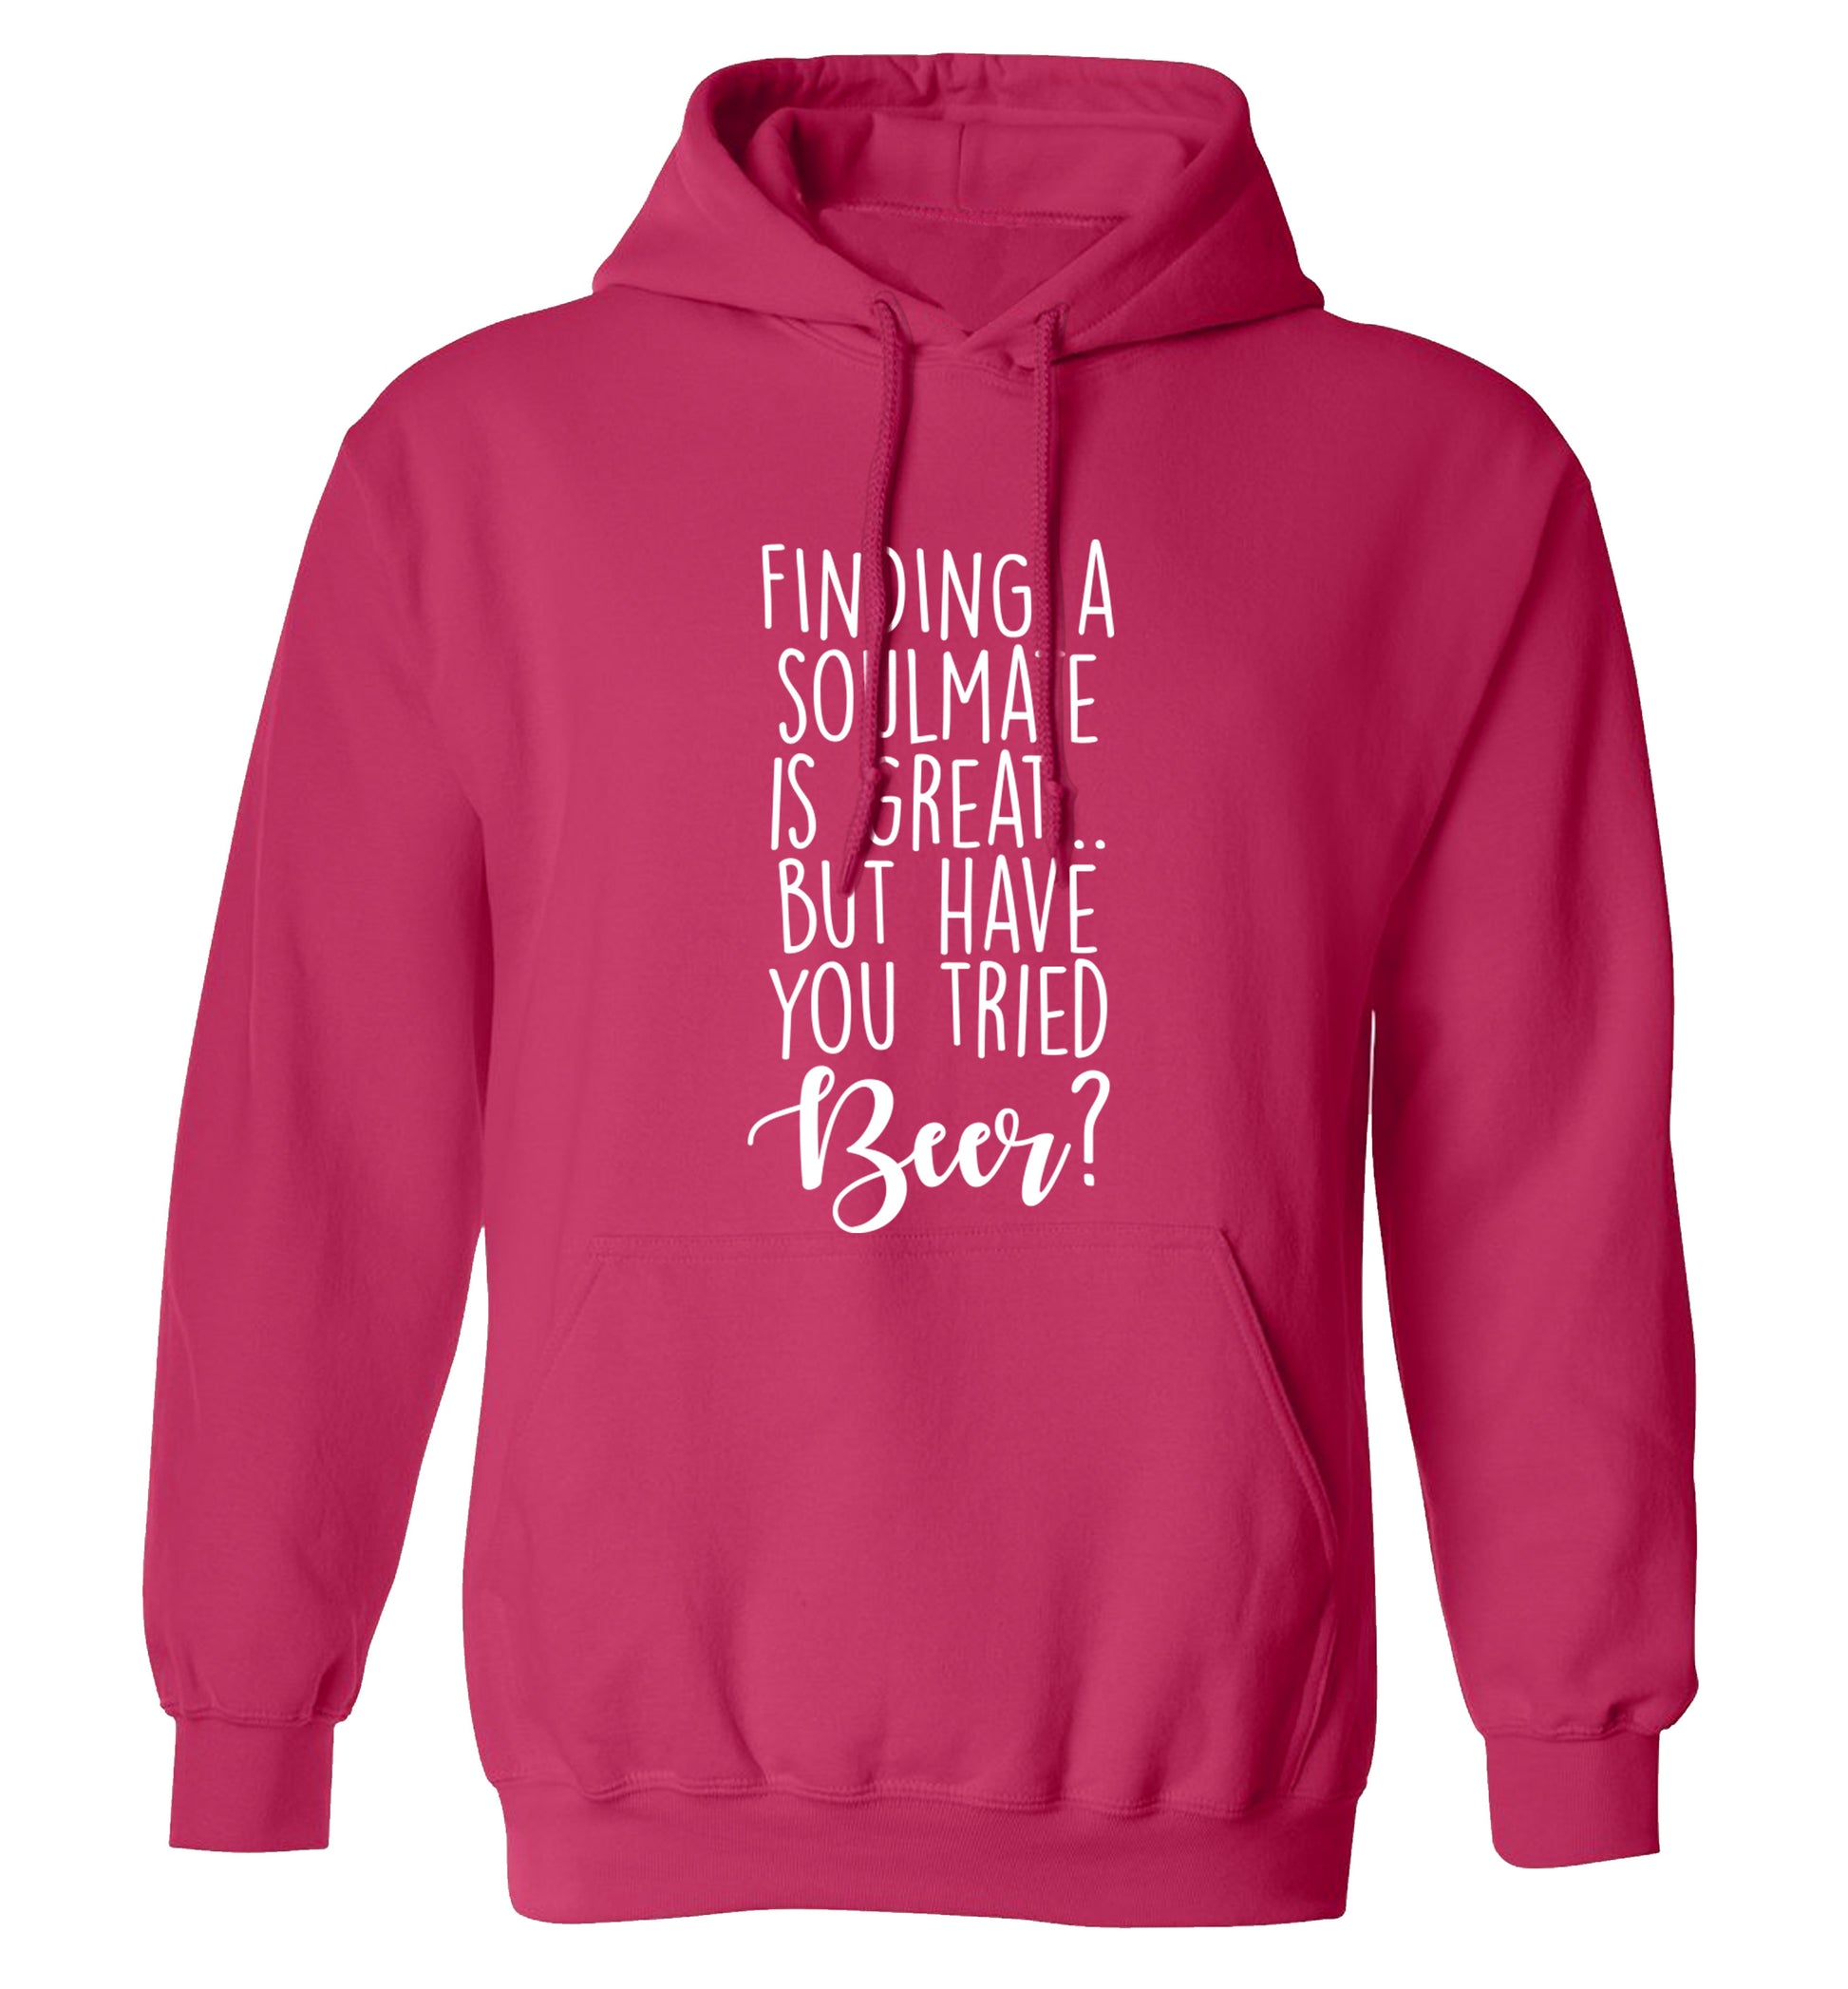 Finding a soulmate is great but have you tried beer? adults unisex pink hoodie 2XL